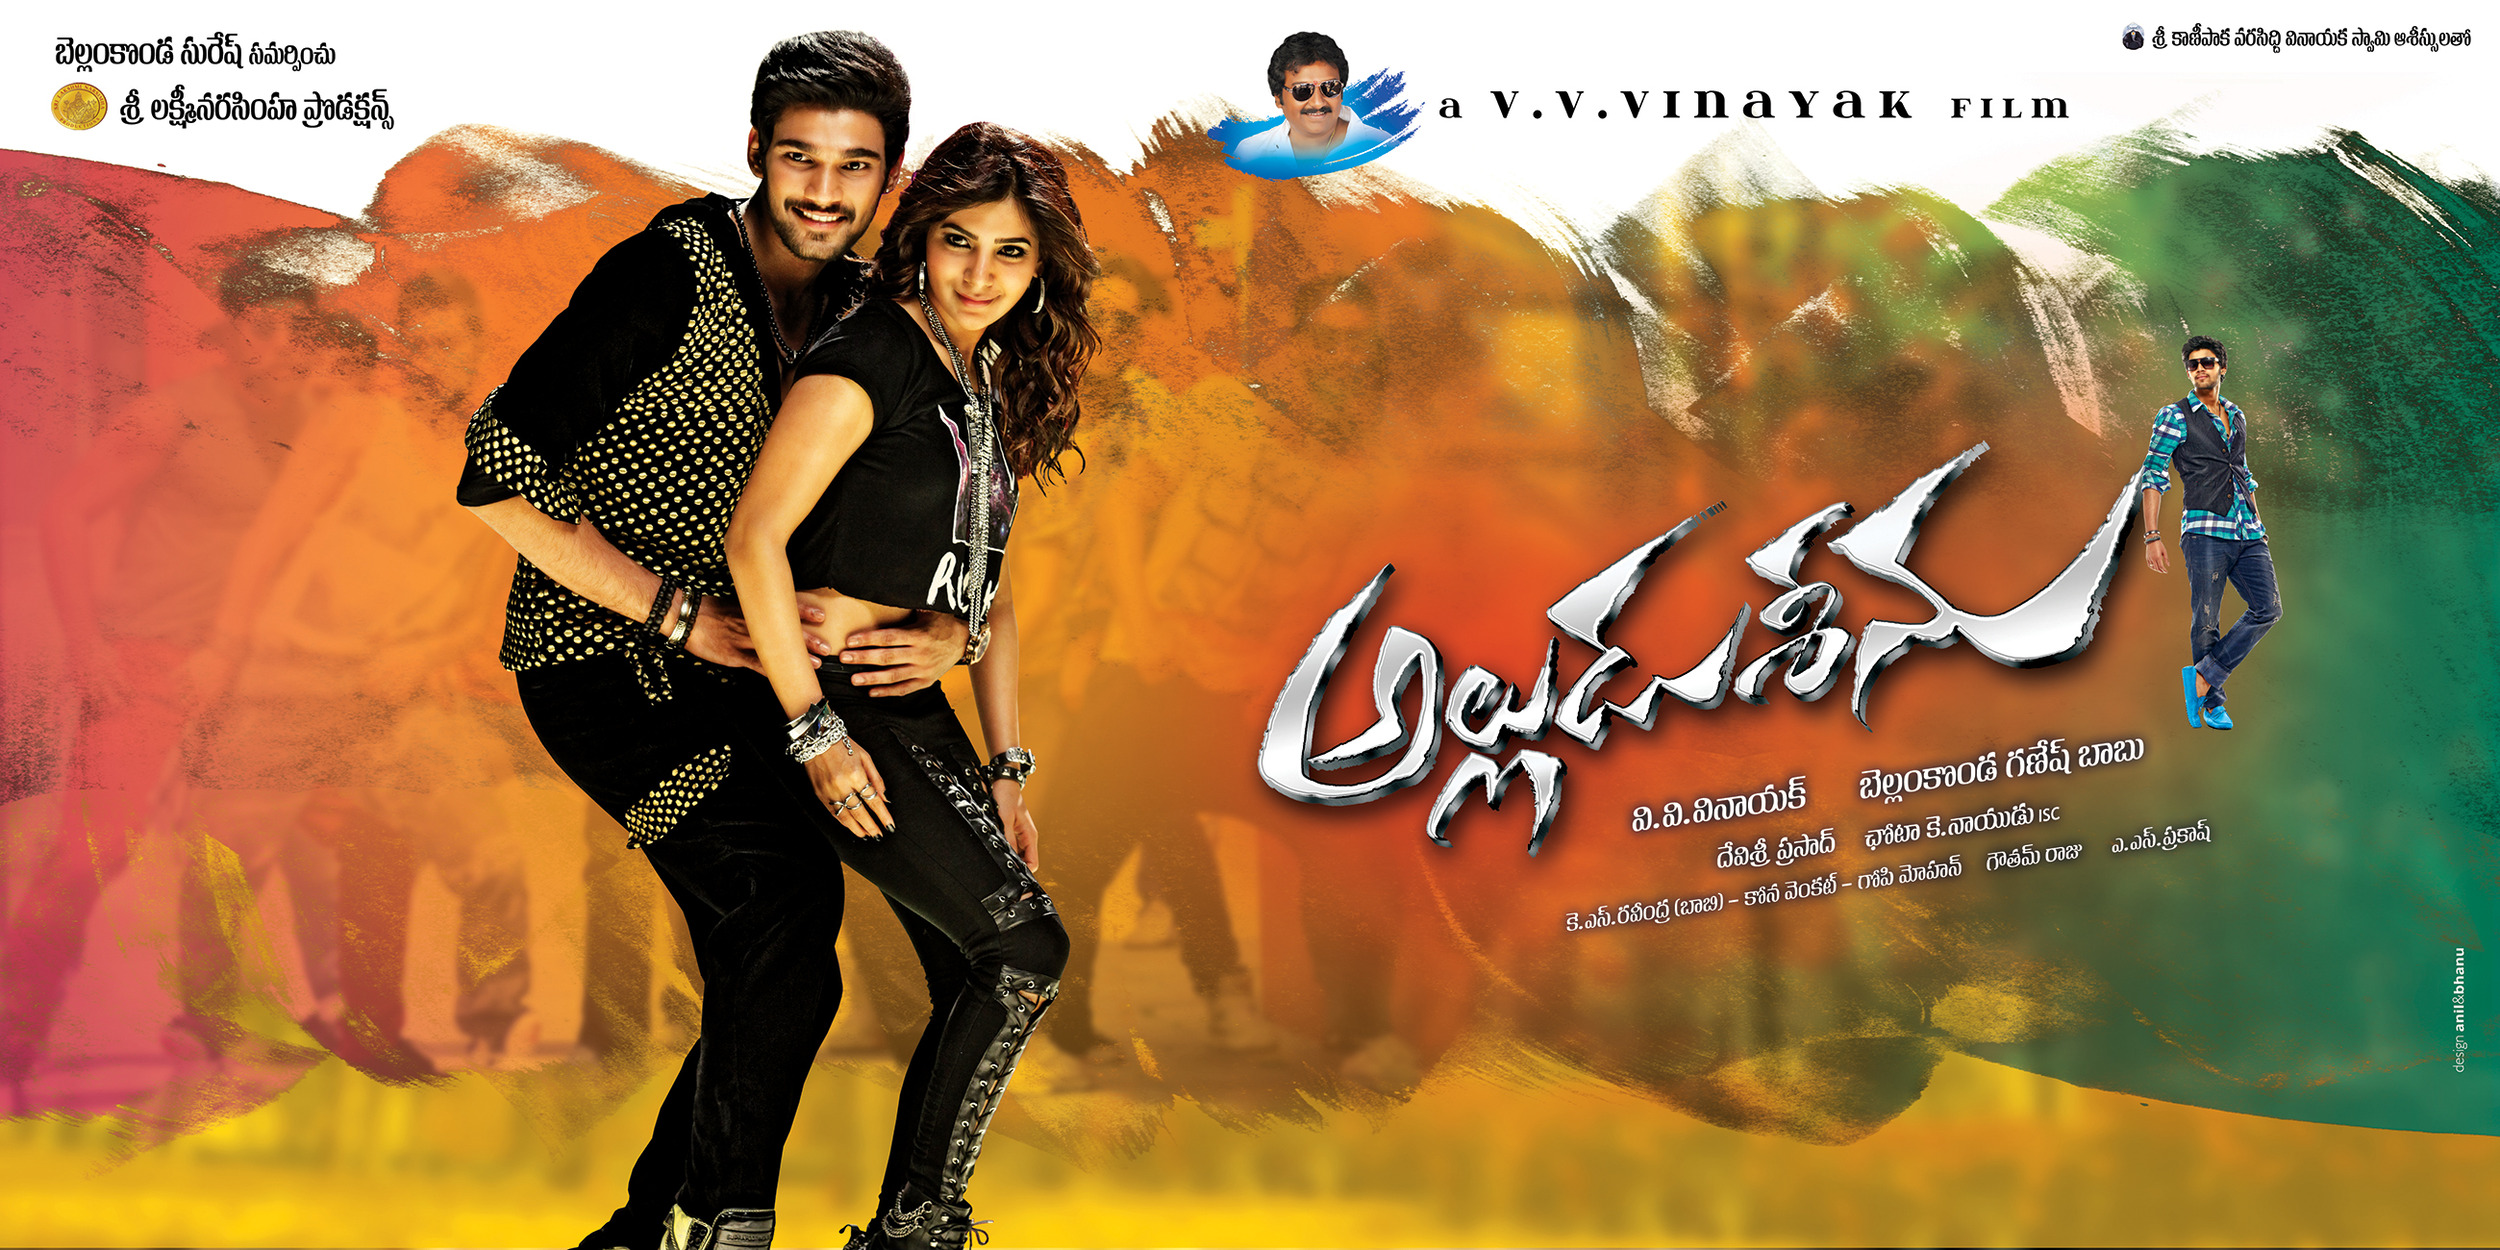 Mega Sized Movie Poster Image for Alludu Seenu (#9 of 9)